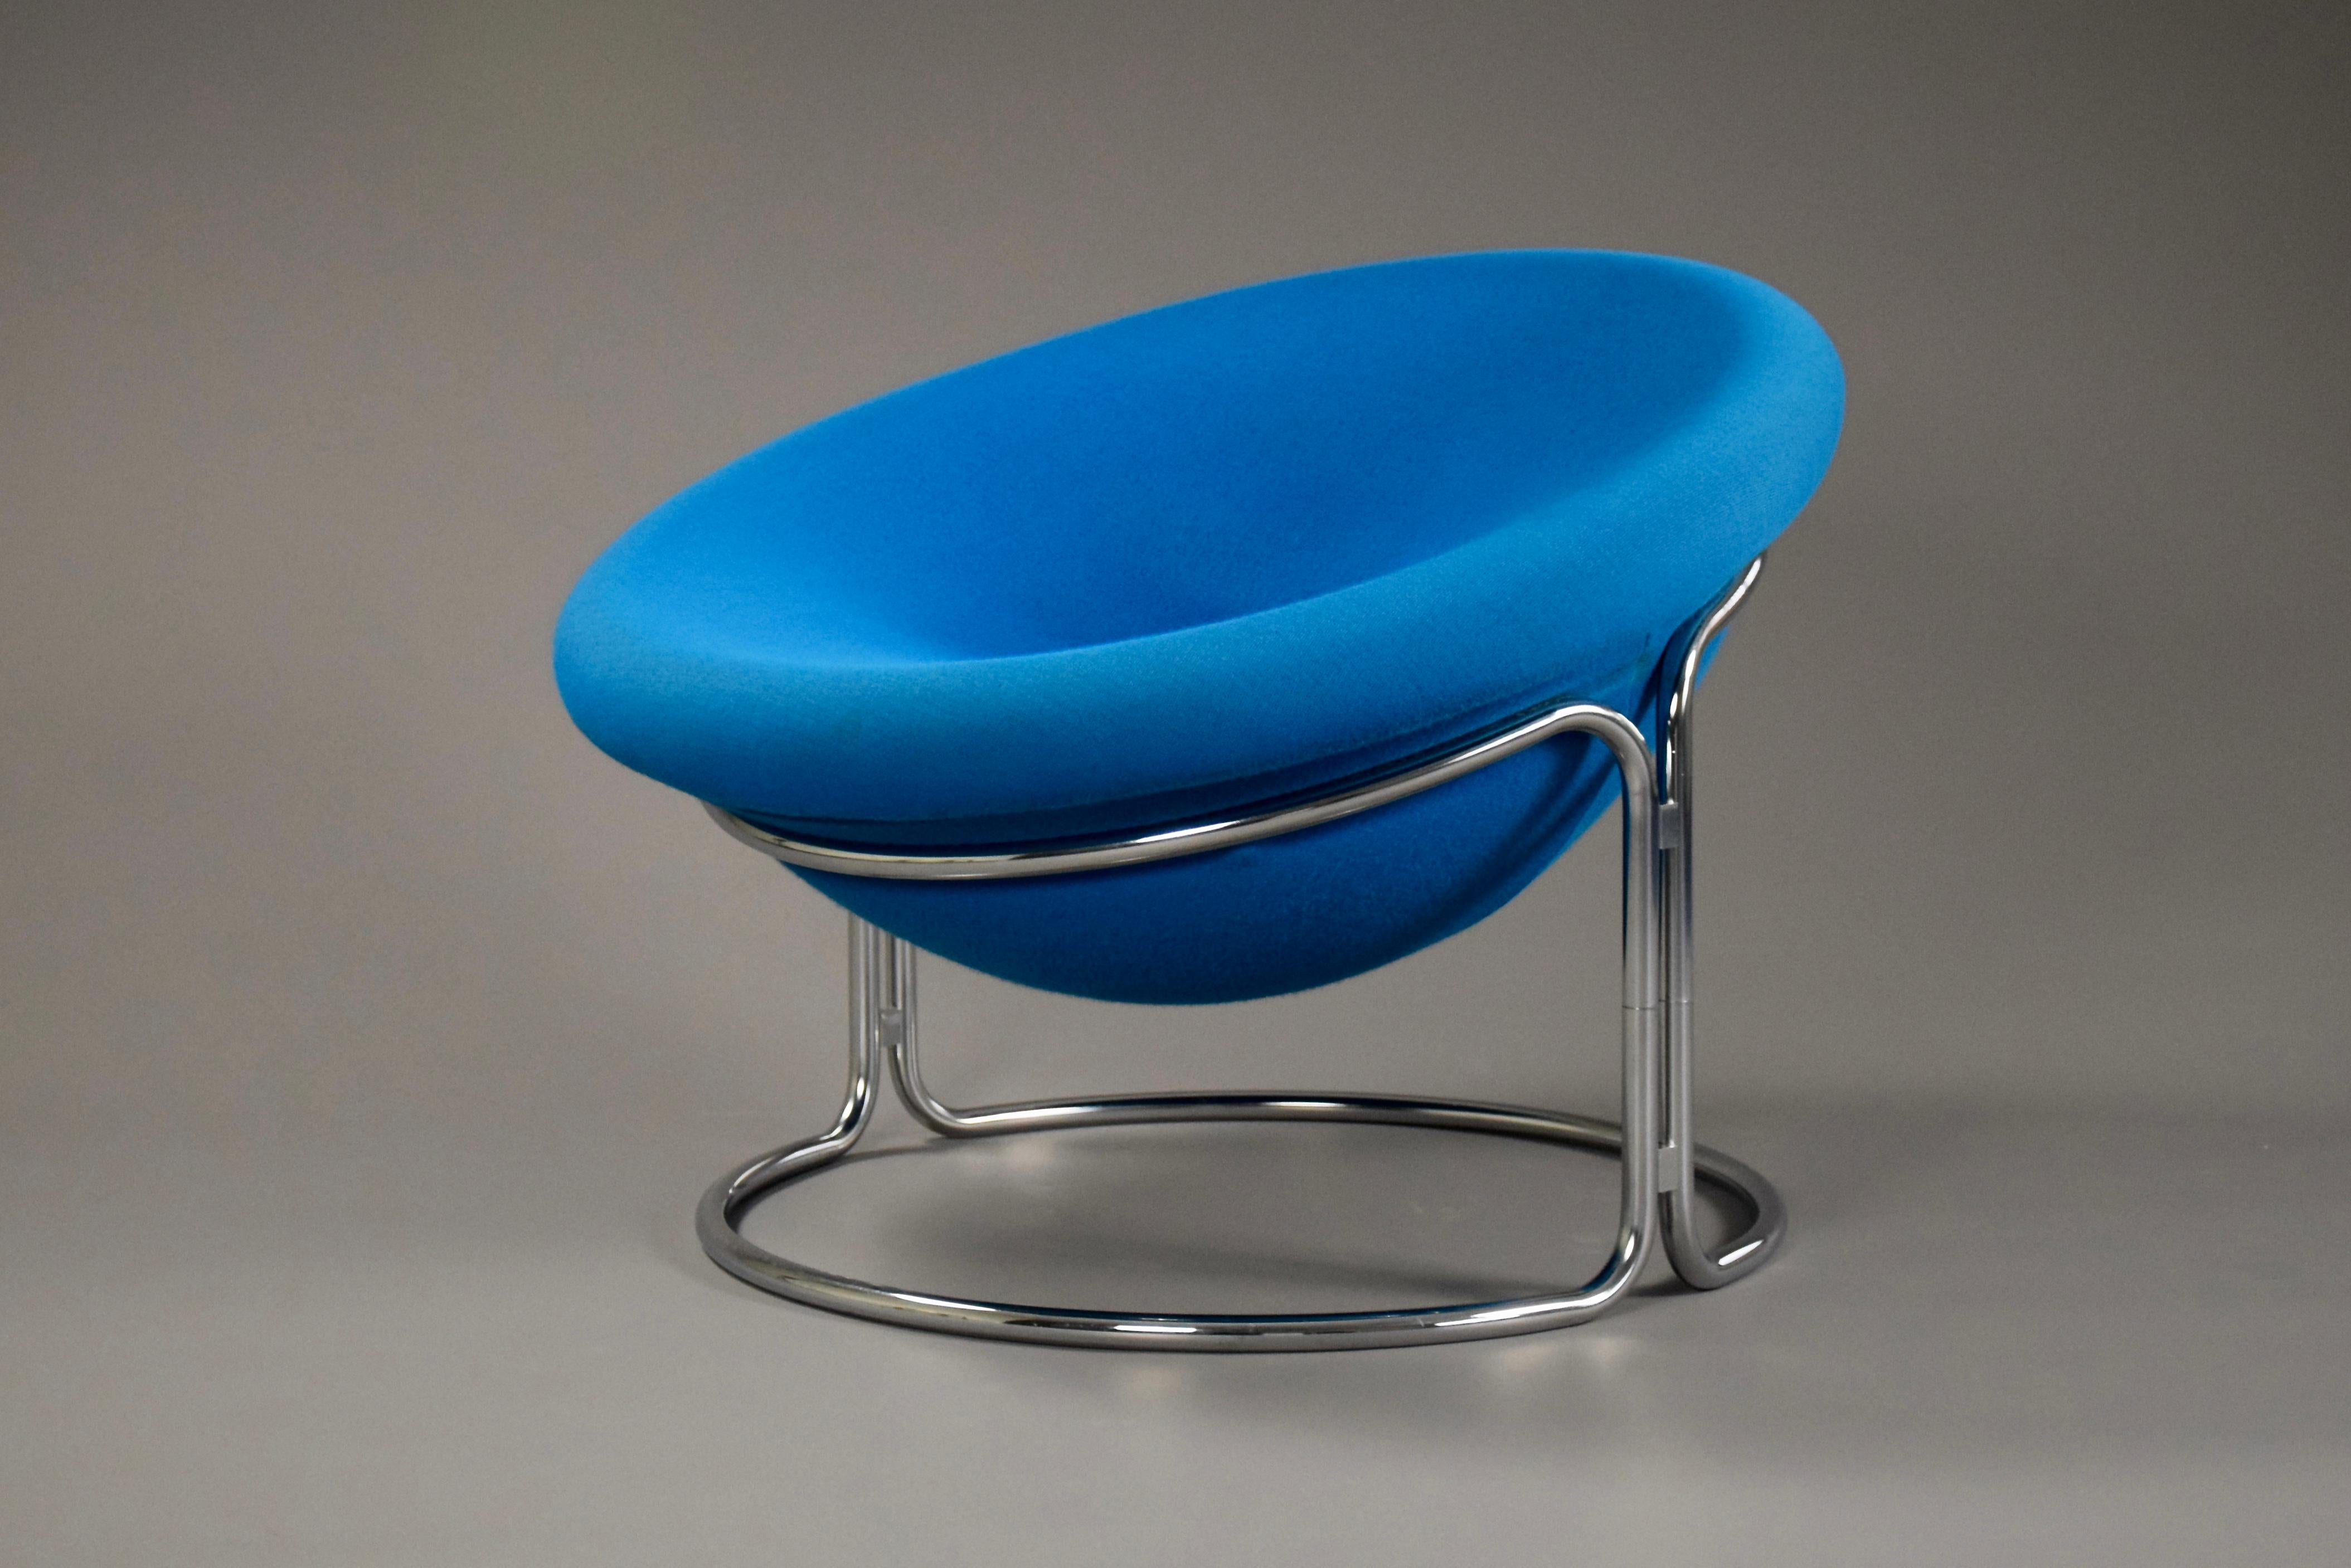 Limited edition Mid-Century Modern space age lounge chair designed by Luigi Colani in 1968 for Kusch & Co. Germany.
This rare piece of which only 40 pieces were produced, is in great condition.
The chair will be shipped insured overseas in a